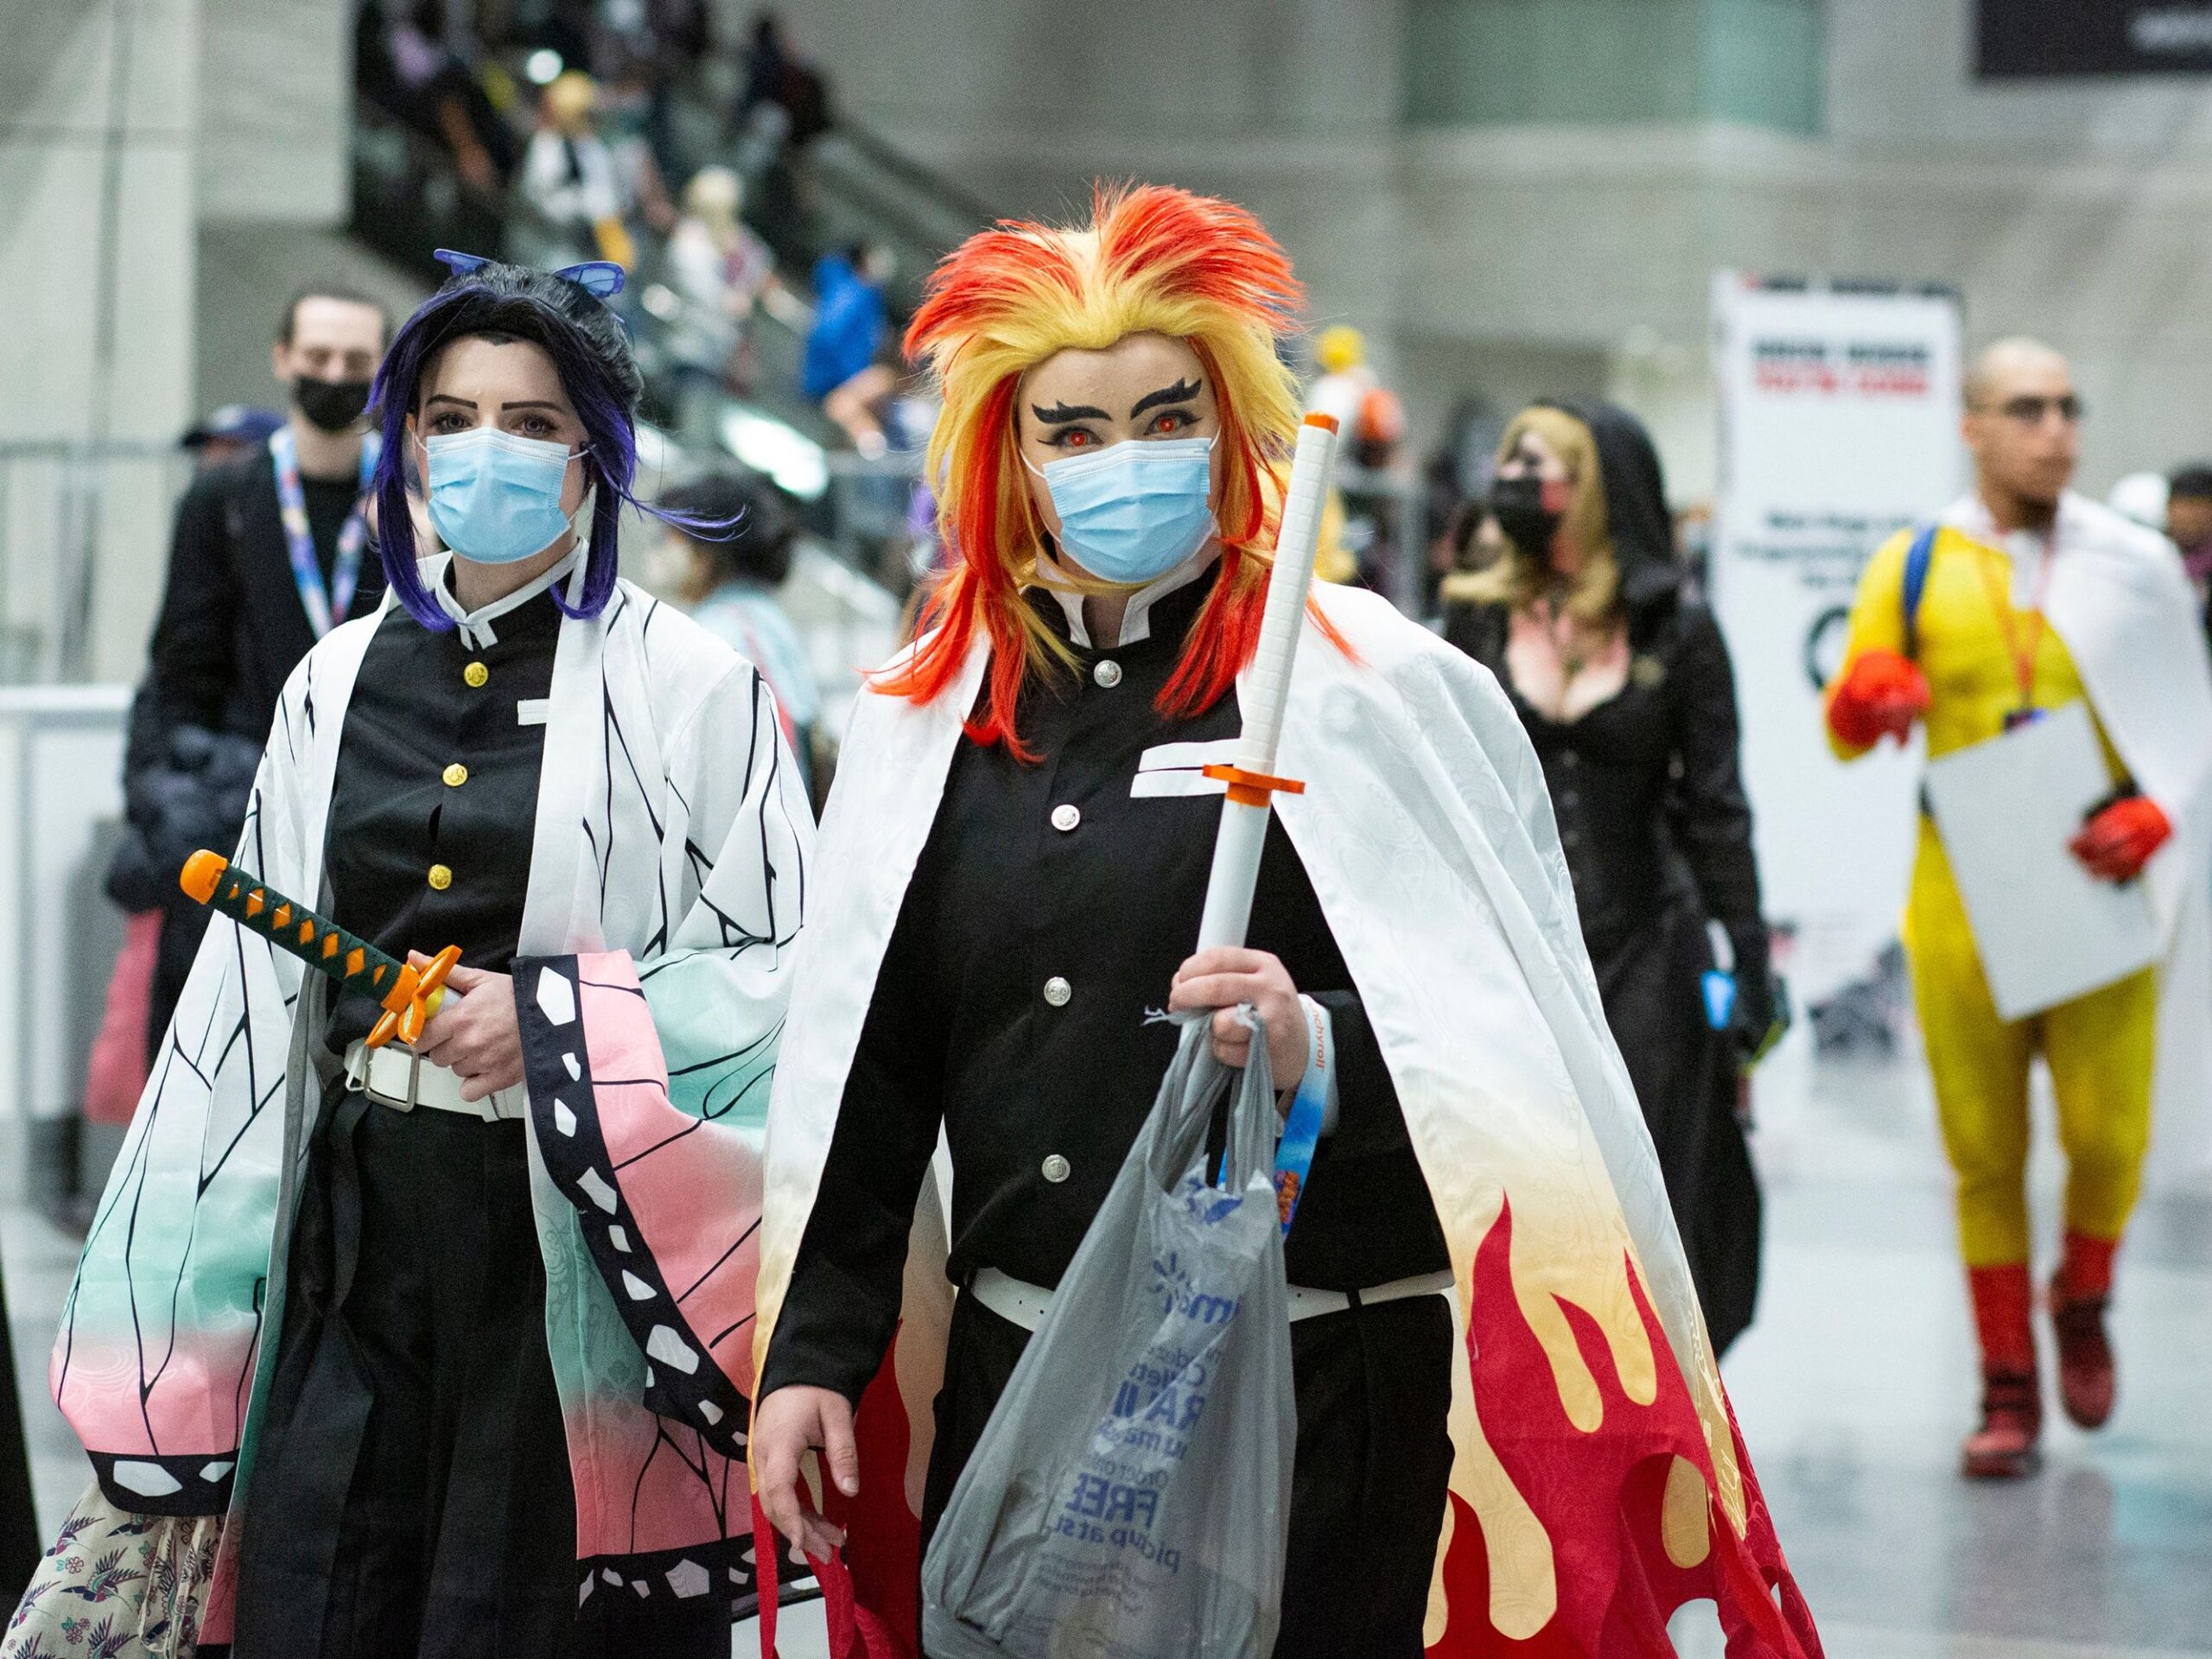 2020 worldwide anime cosplay conventions in united states